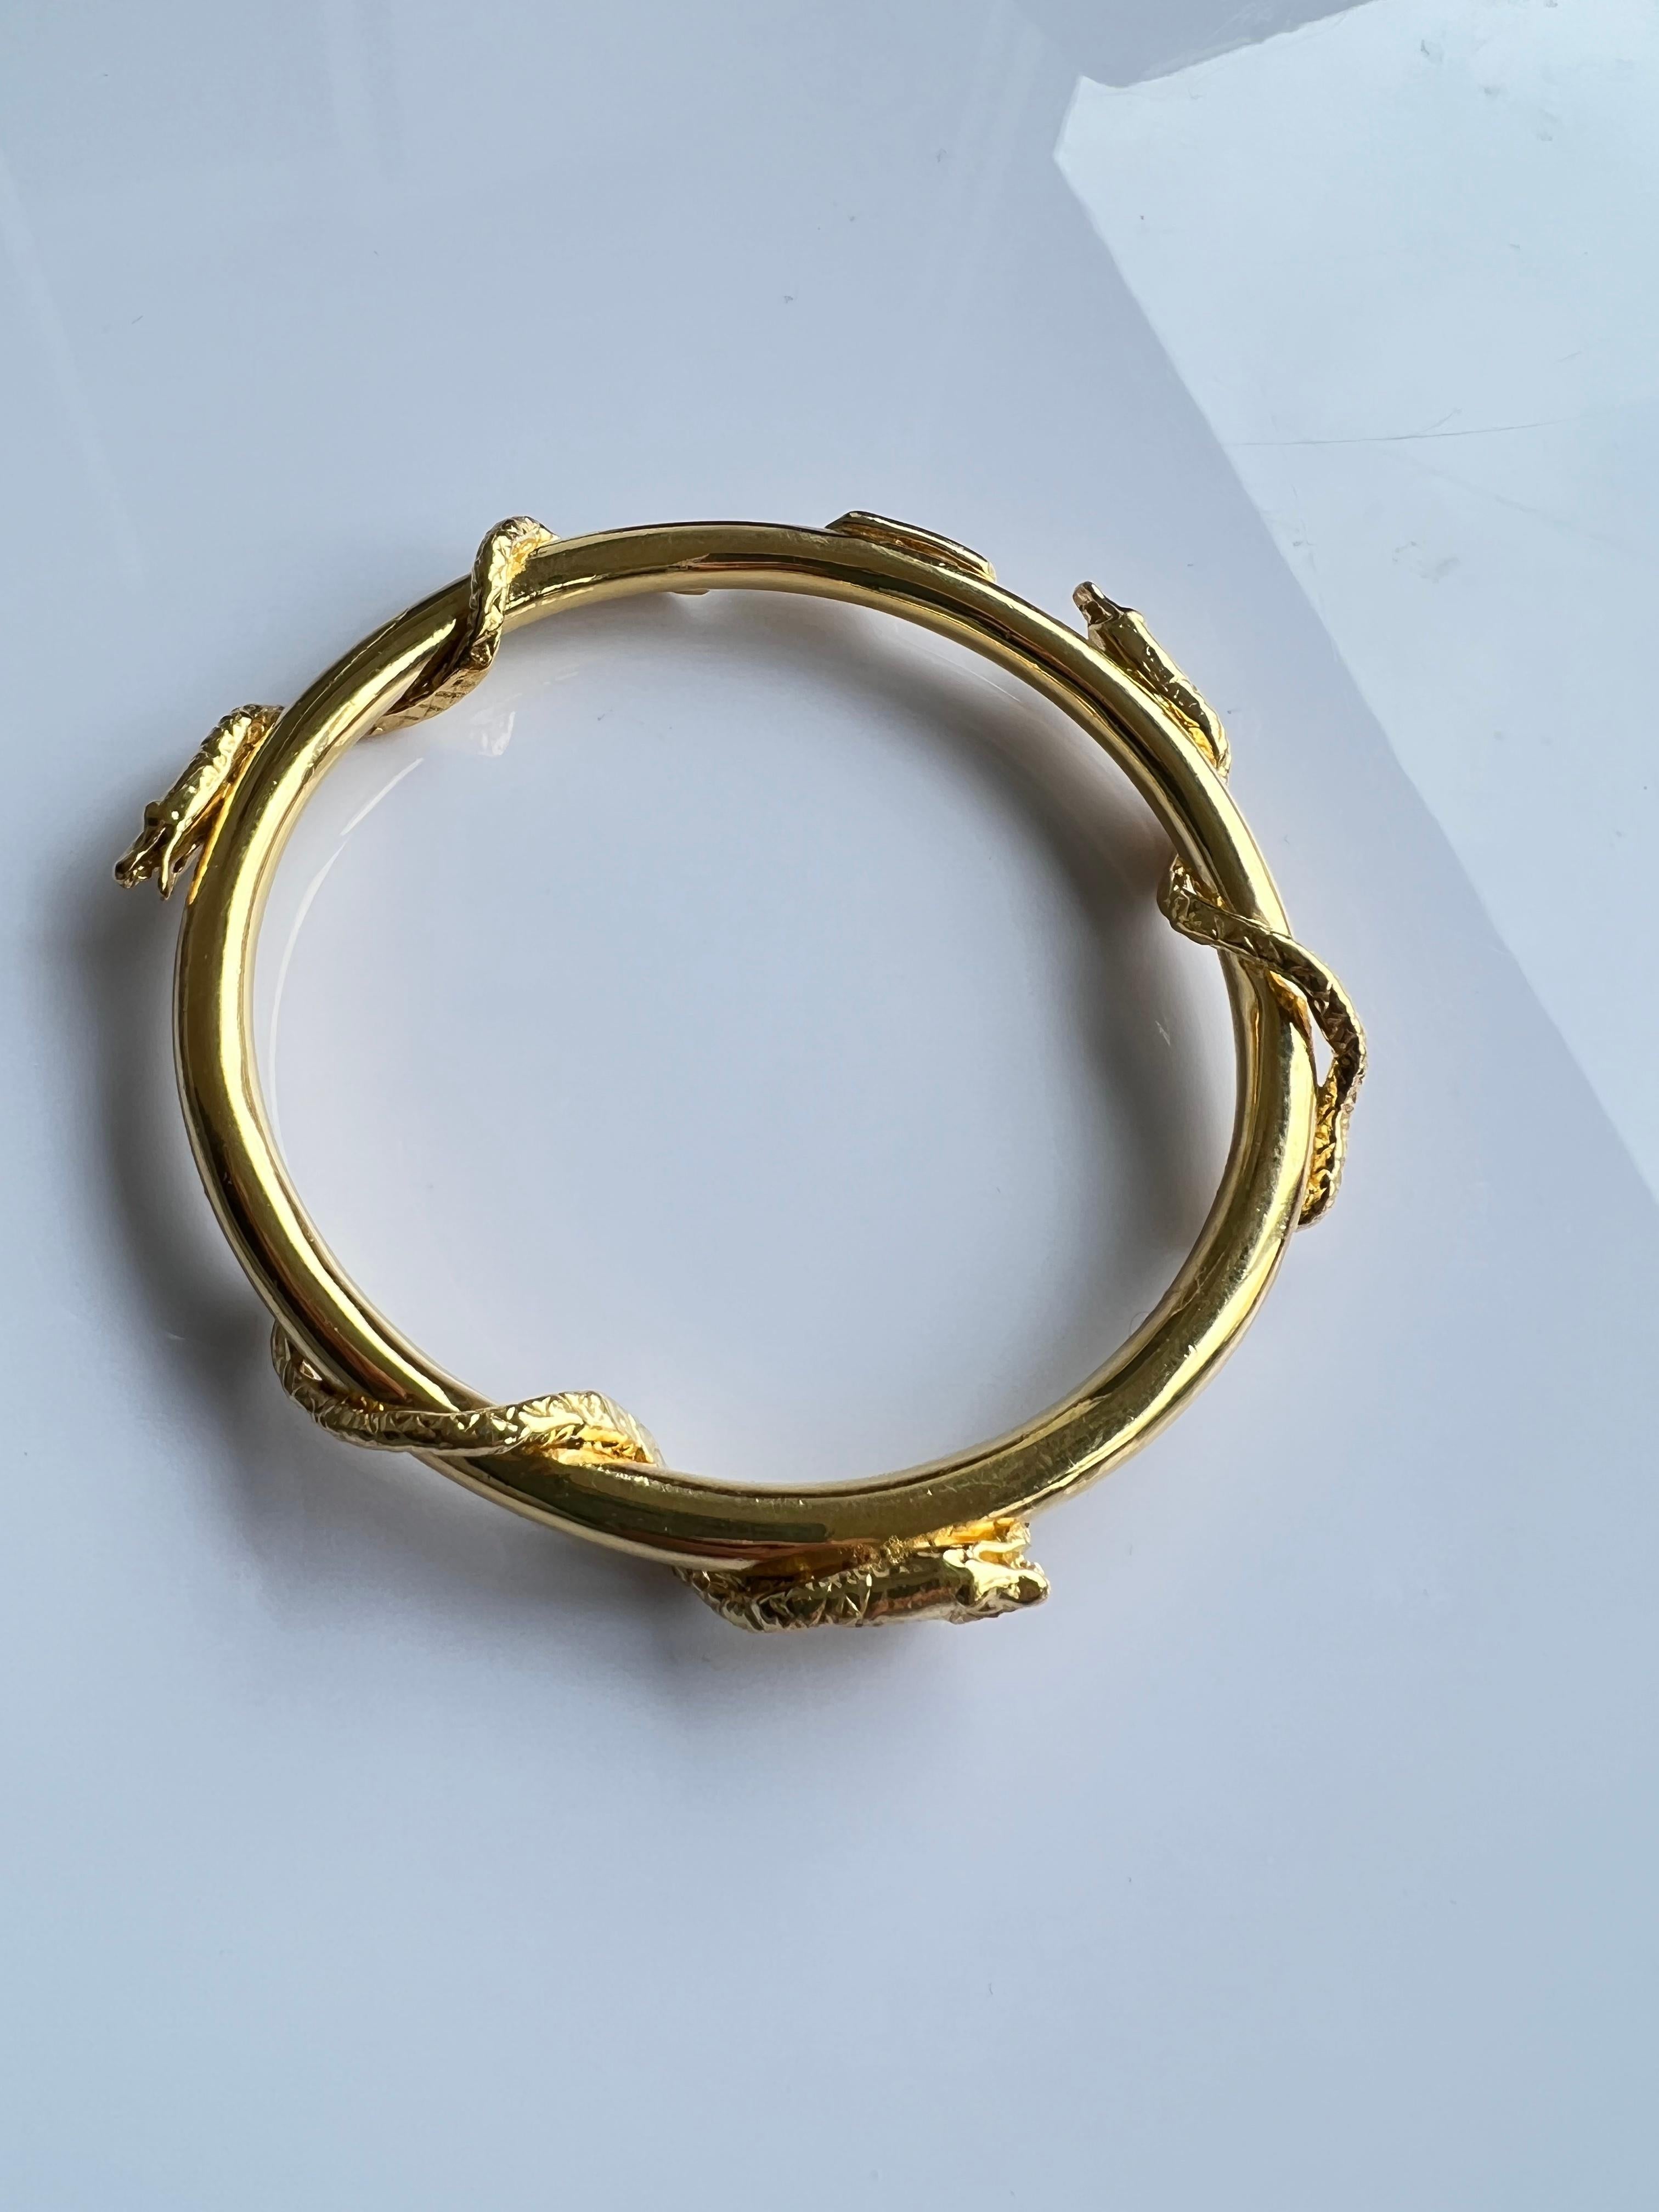 Snake Bangle Bracelet Victorian Style Gold Plated J Dauphin For Sale 1